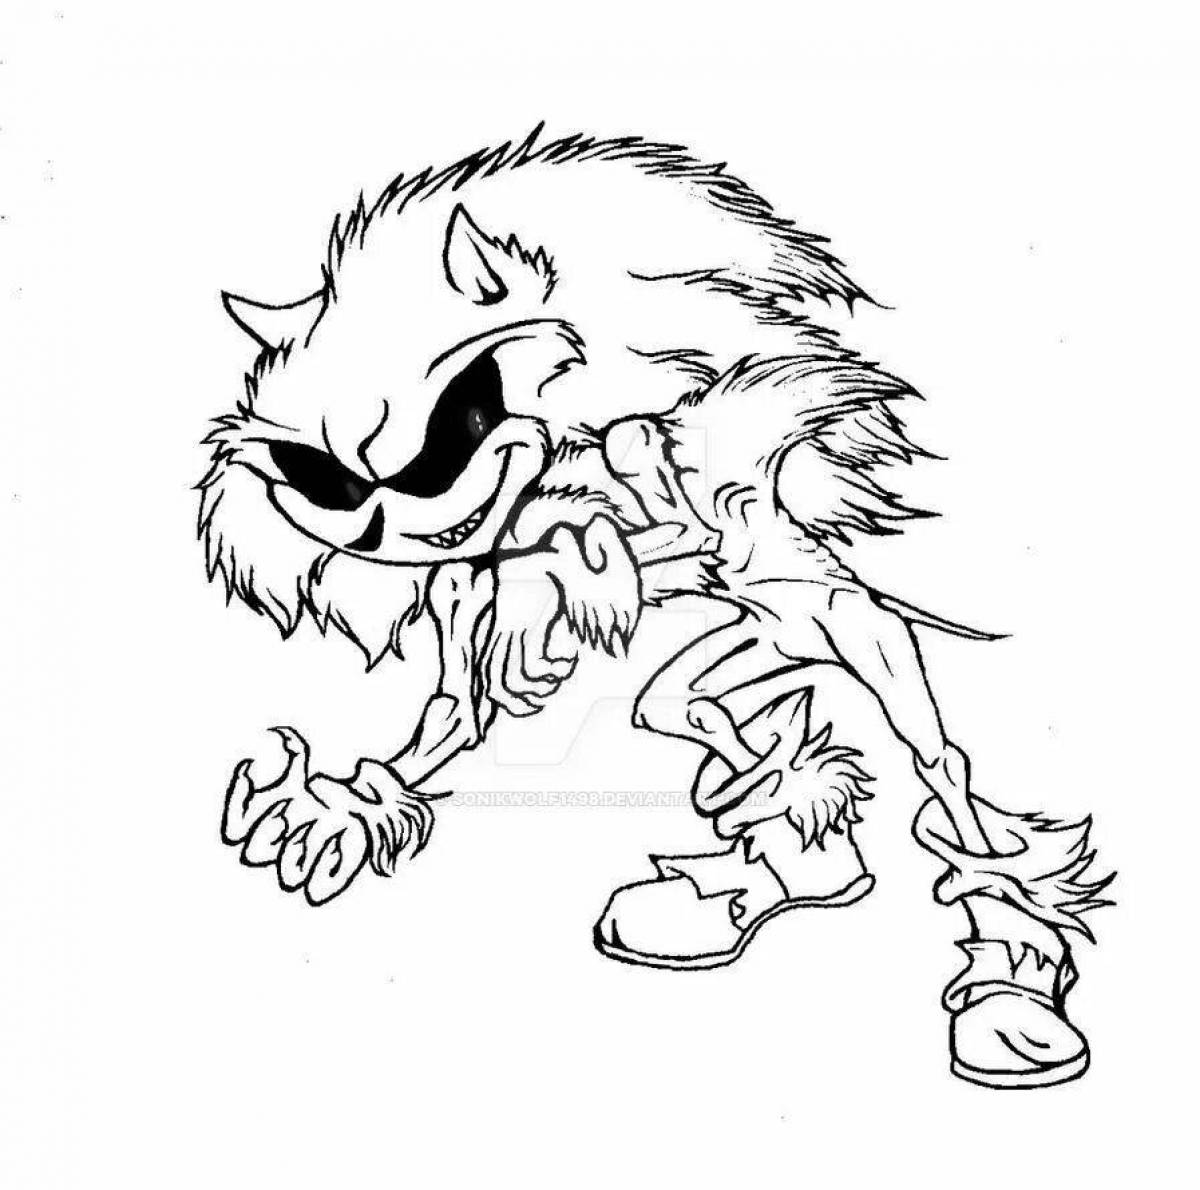 Scary sonic #2